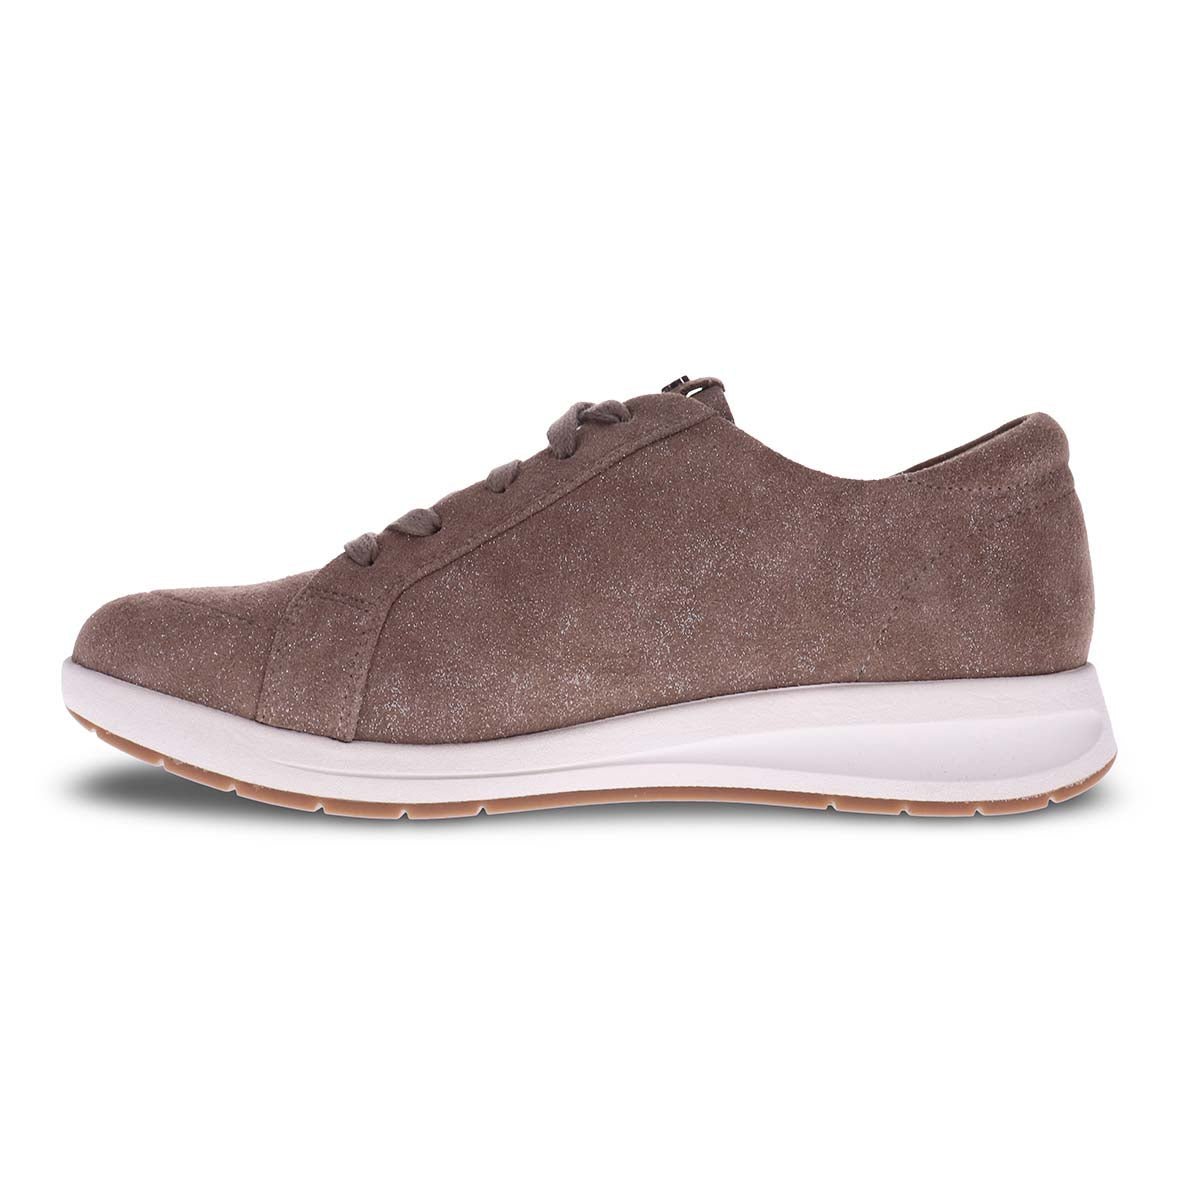 REVERE ATHENS WOMEN SNEAKERS IN RUSTY METALLIC - TLW Shoes